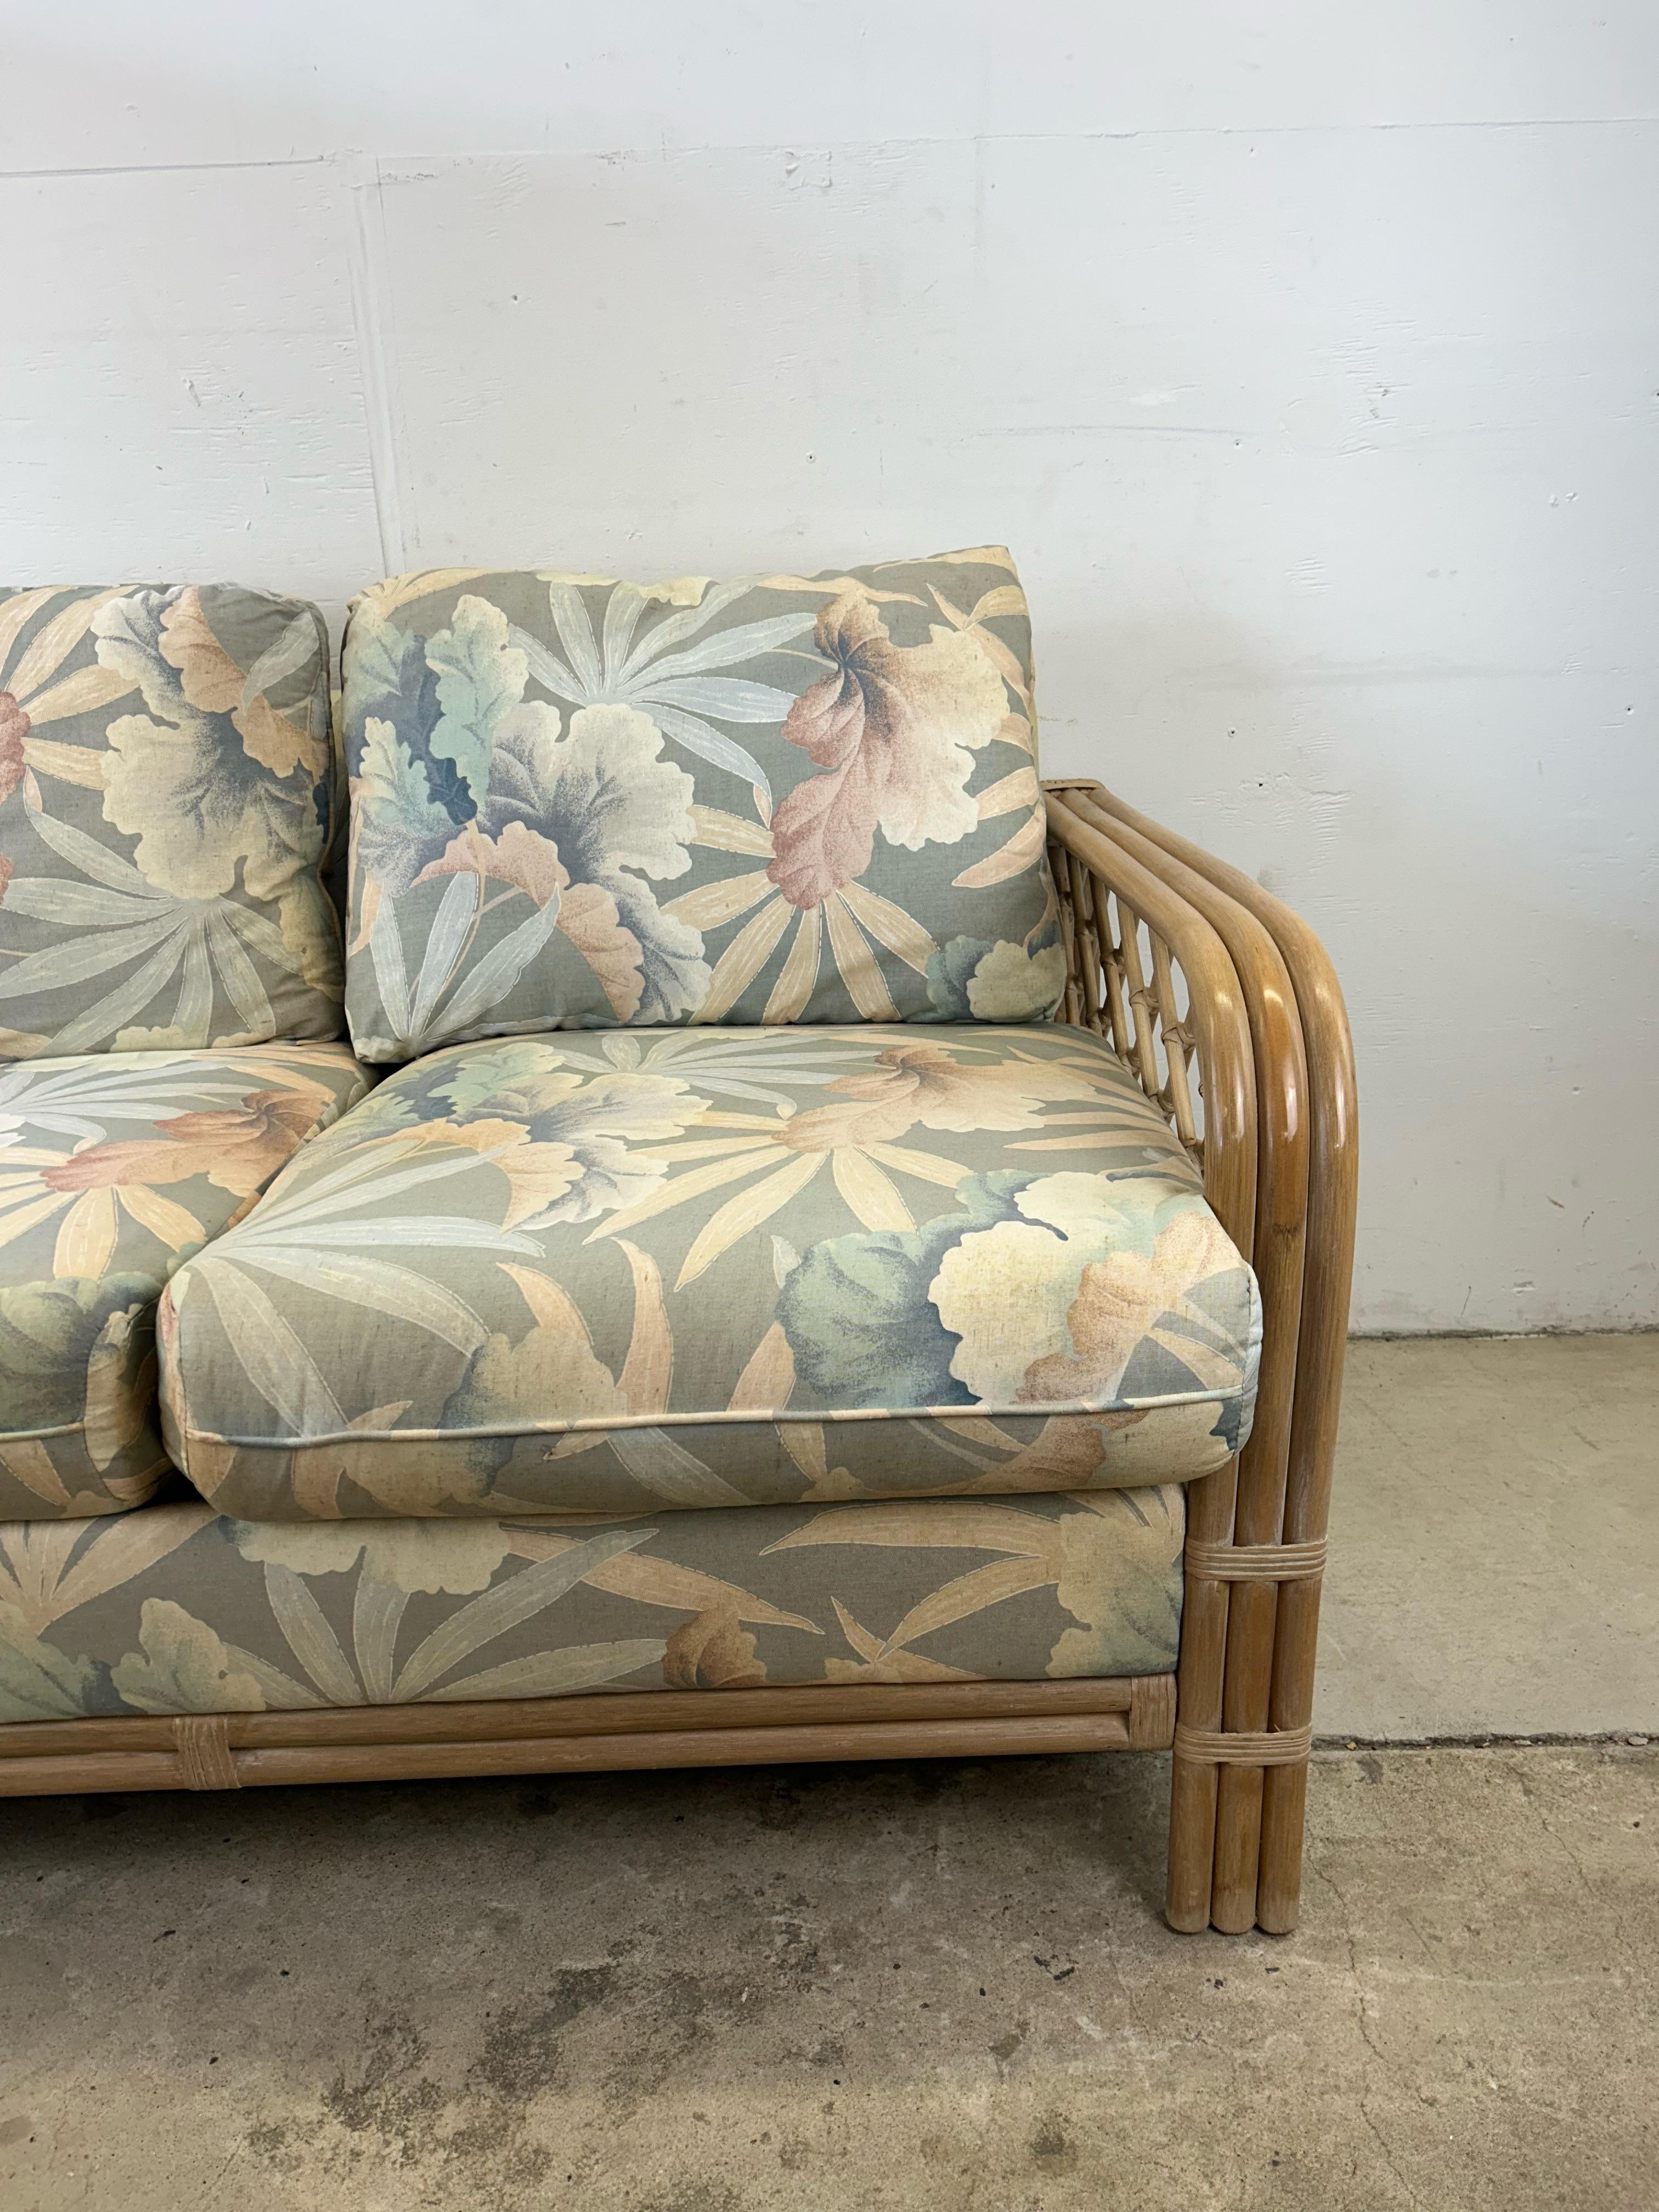 Late 20th Century Vintage Boho Chic Rattan Loveseat with Floral Upholstery For Sale